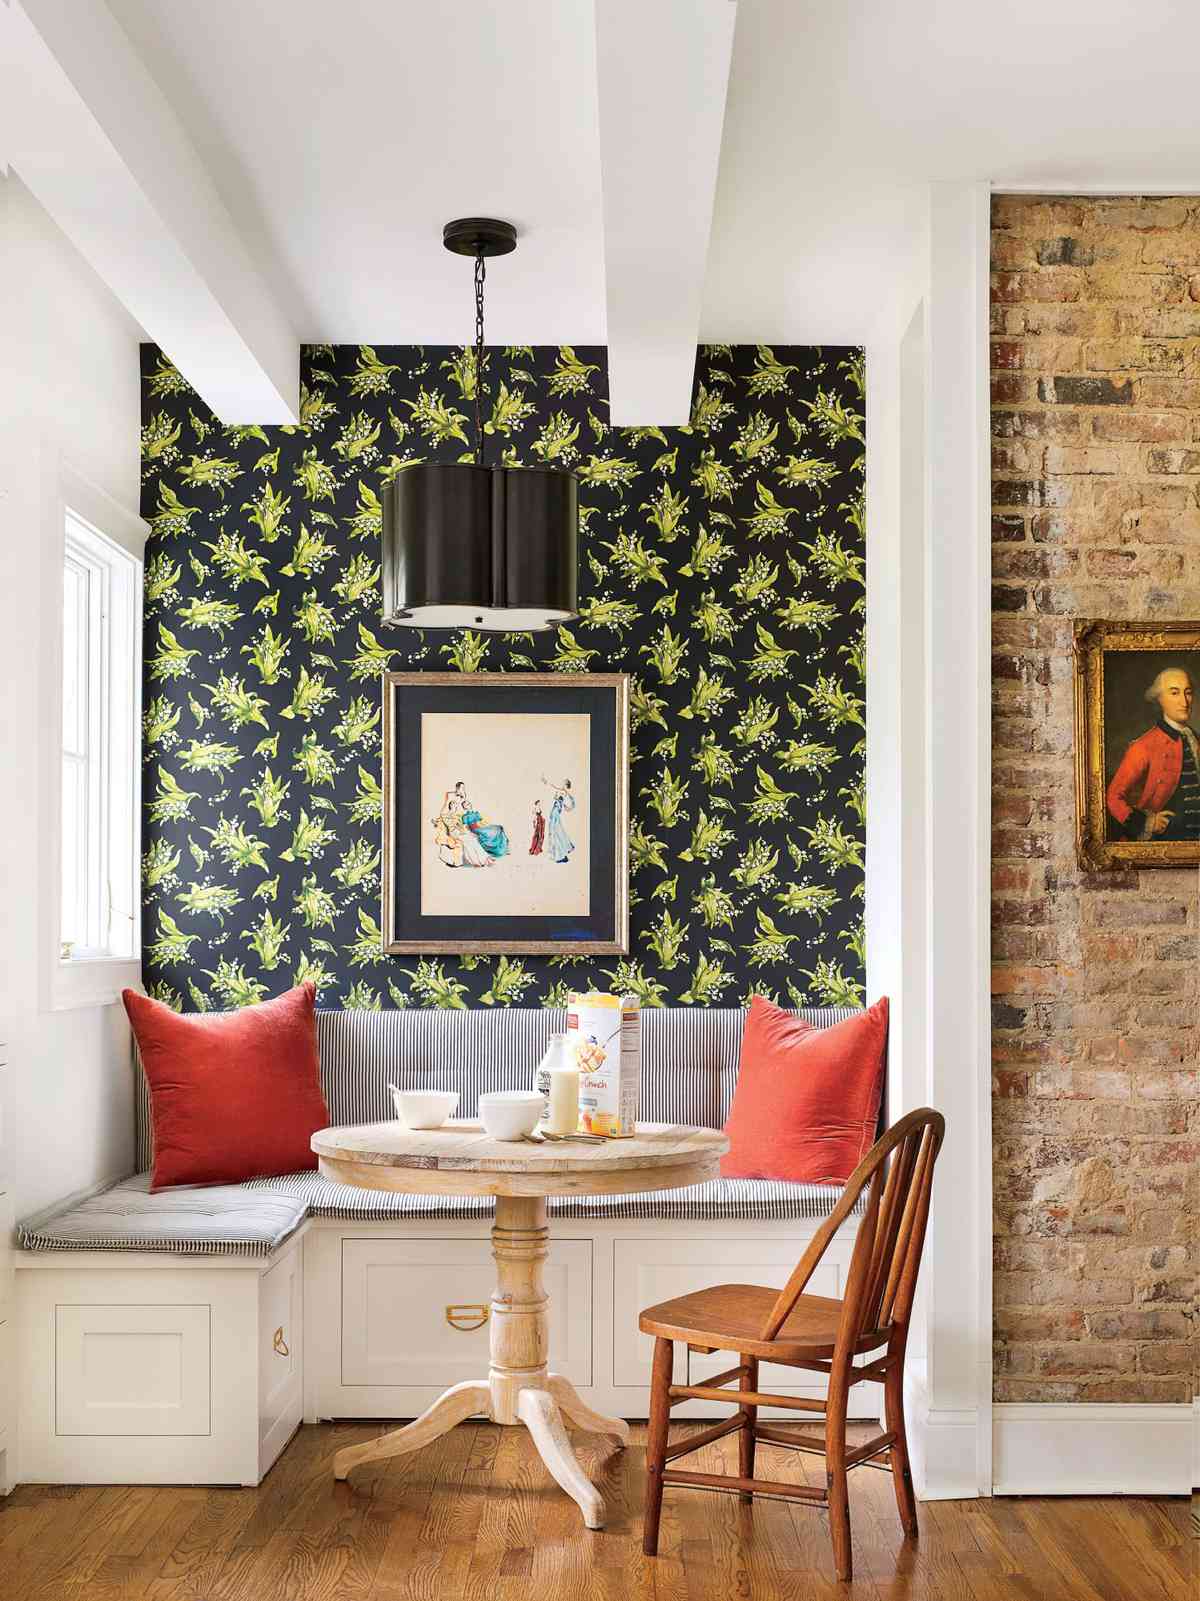 Breakfast Nook Ideas Southern Living,Wall Paint Design Ideas With Tape Grey